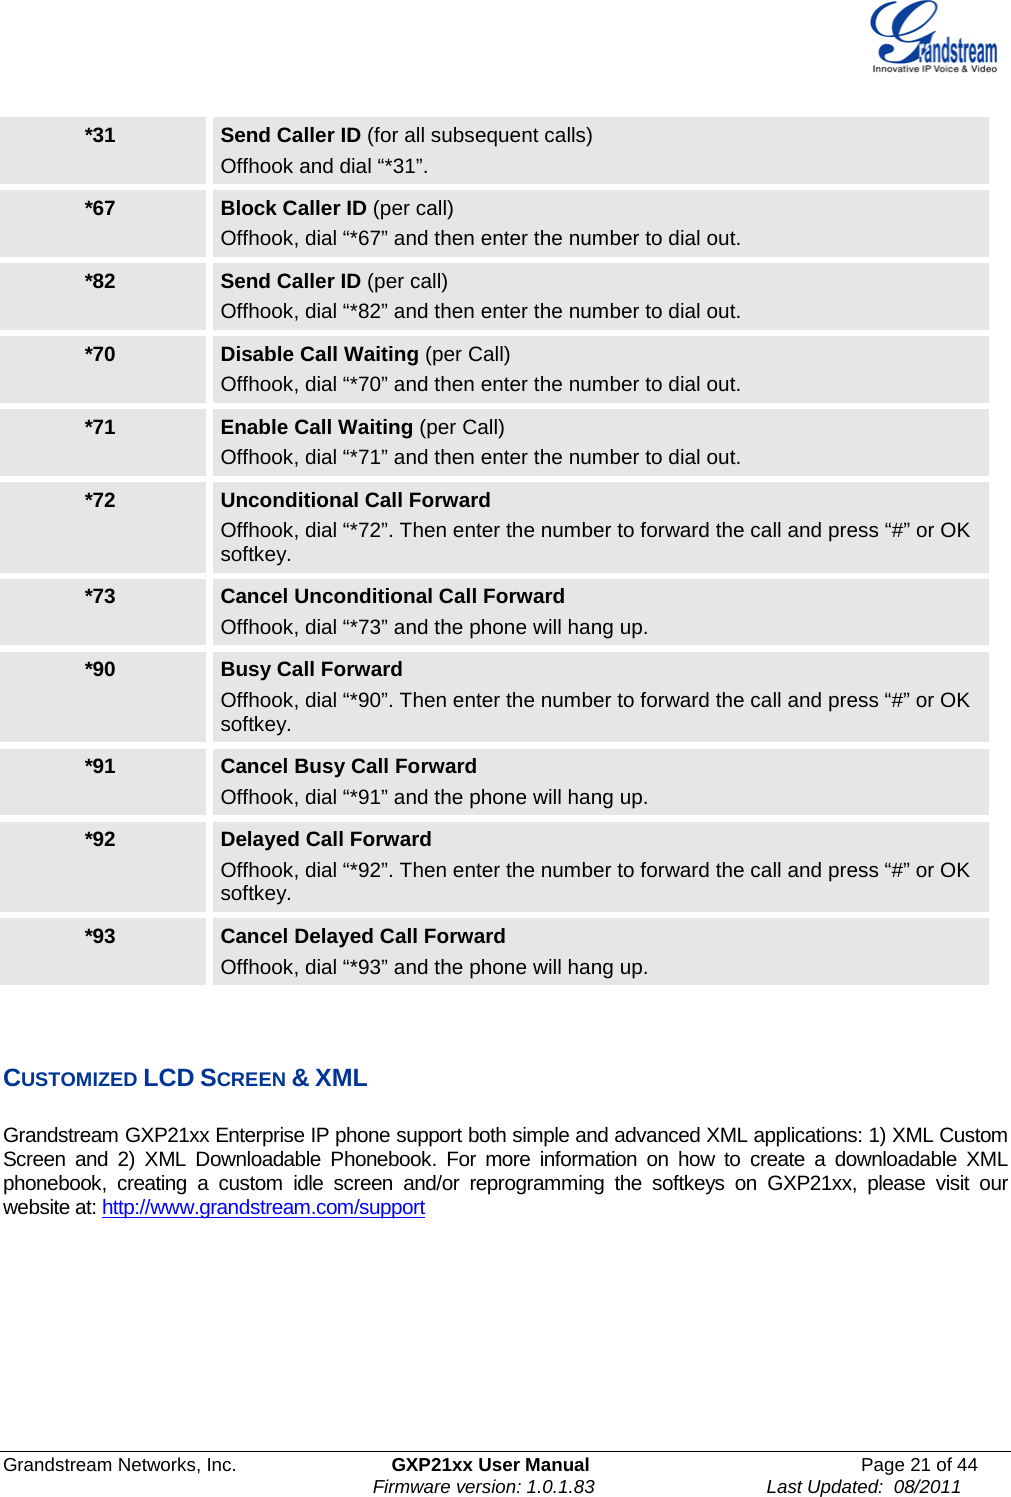  Grandstream Networks, Inc. GXP21xx User Manual Page 21 of 44                                                              Firmware version: 1.0.1.83                                 Last Updated:  08/2011  *31 Send Caller ID (for all subsequent calls) Offhook and dial “*31”. *67 Block Caller ID (per call) Offhook, dial “*67” and then enter the number to dial out. *82 Send Caller ID (per call) Offhook, dial “*82” and then enter the number to dial out. *70 Disable Call Waiting (per Call) Offhook, dial “*70” and then enter the number to dial out. *71 Enable Call Waiting (per Call) Offhook, dial “*71” and then enter the number to dial out. *72 Unconditional Call Forward  Offhook, dial “*72”. Then enter the number to forward the call and press “#” or OK softkey. *73 Cancel Unconditional Call Forward Offhook, dial “*73” and the phone will hang up. *90 Busy Call Forward Offhook, dial “*90”. Then enter the number to forward the call and press “#” or OK softkey. *91 Cancel Busy Call Forward Offhook, dial “*91” and the phone will hang up. *92 Delayed Call Forward Offhook, dial “*92”. Then enter the number to forward the call and press “#” or OK softkey. *93 Cancel Delayed Call Forward Offhook, dial “*93” and the phone will hang up.    CUSTOMIZED LCD SCREEN &amp; XML  Grandstream GXP21xx Enterprise IP phone support both simple and advanced XML applications: 1) XML Custom Screen and 2) XML Downloadable Phonebook.  For more information on how to create a downloadable XML phonebook,  creating  a custom idle screen and/or reprogramming the softkeys on GXP21xx, please visit our website at: http://www.grandstream.com/support     